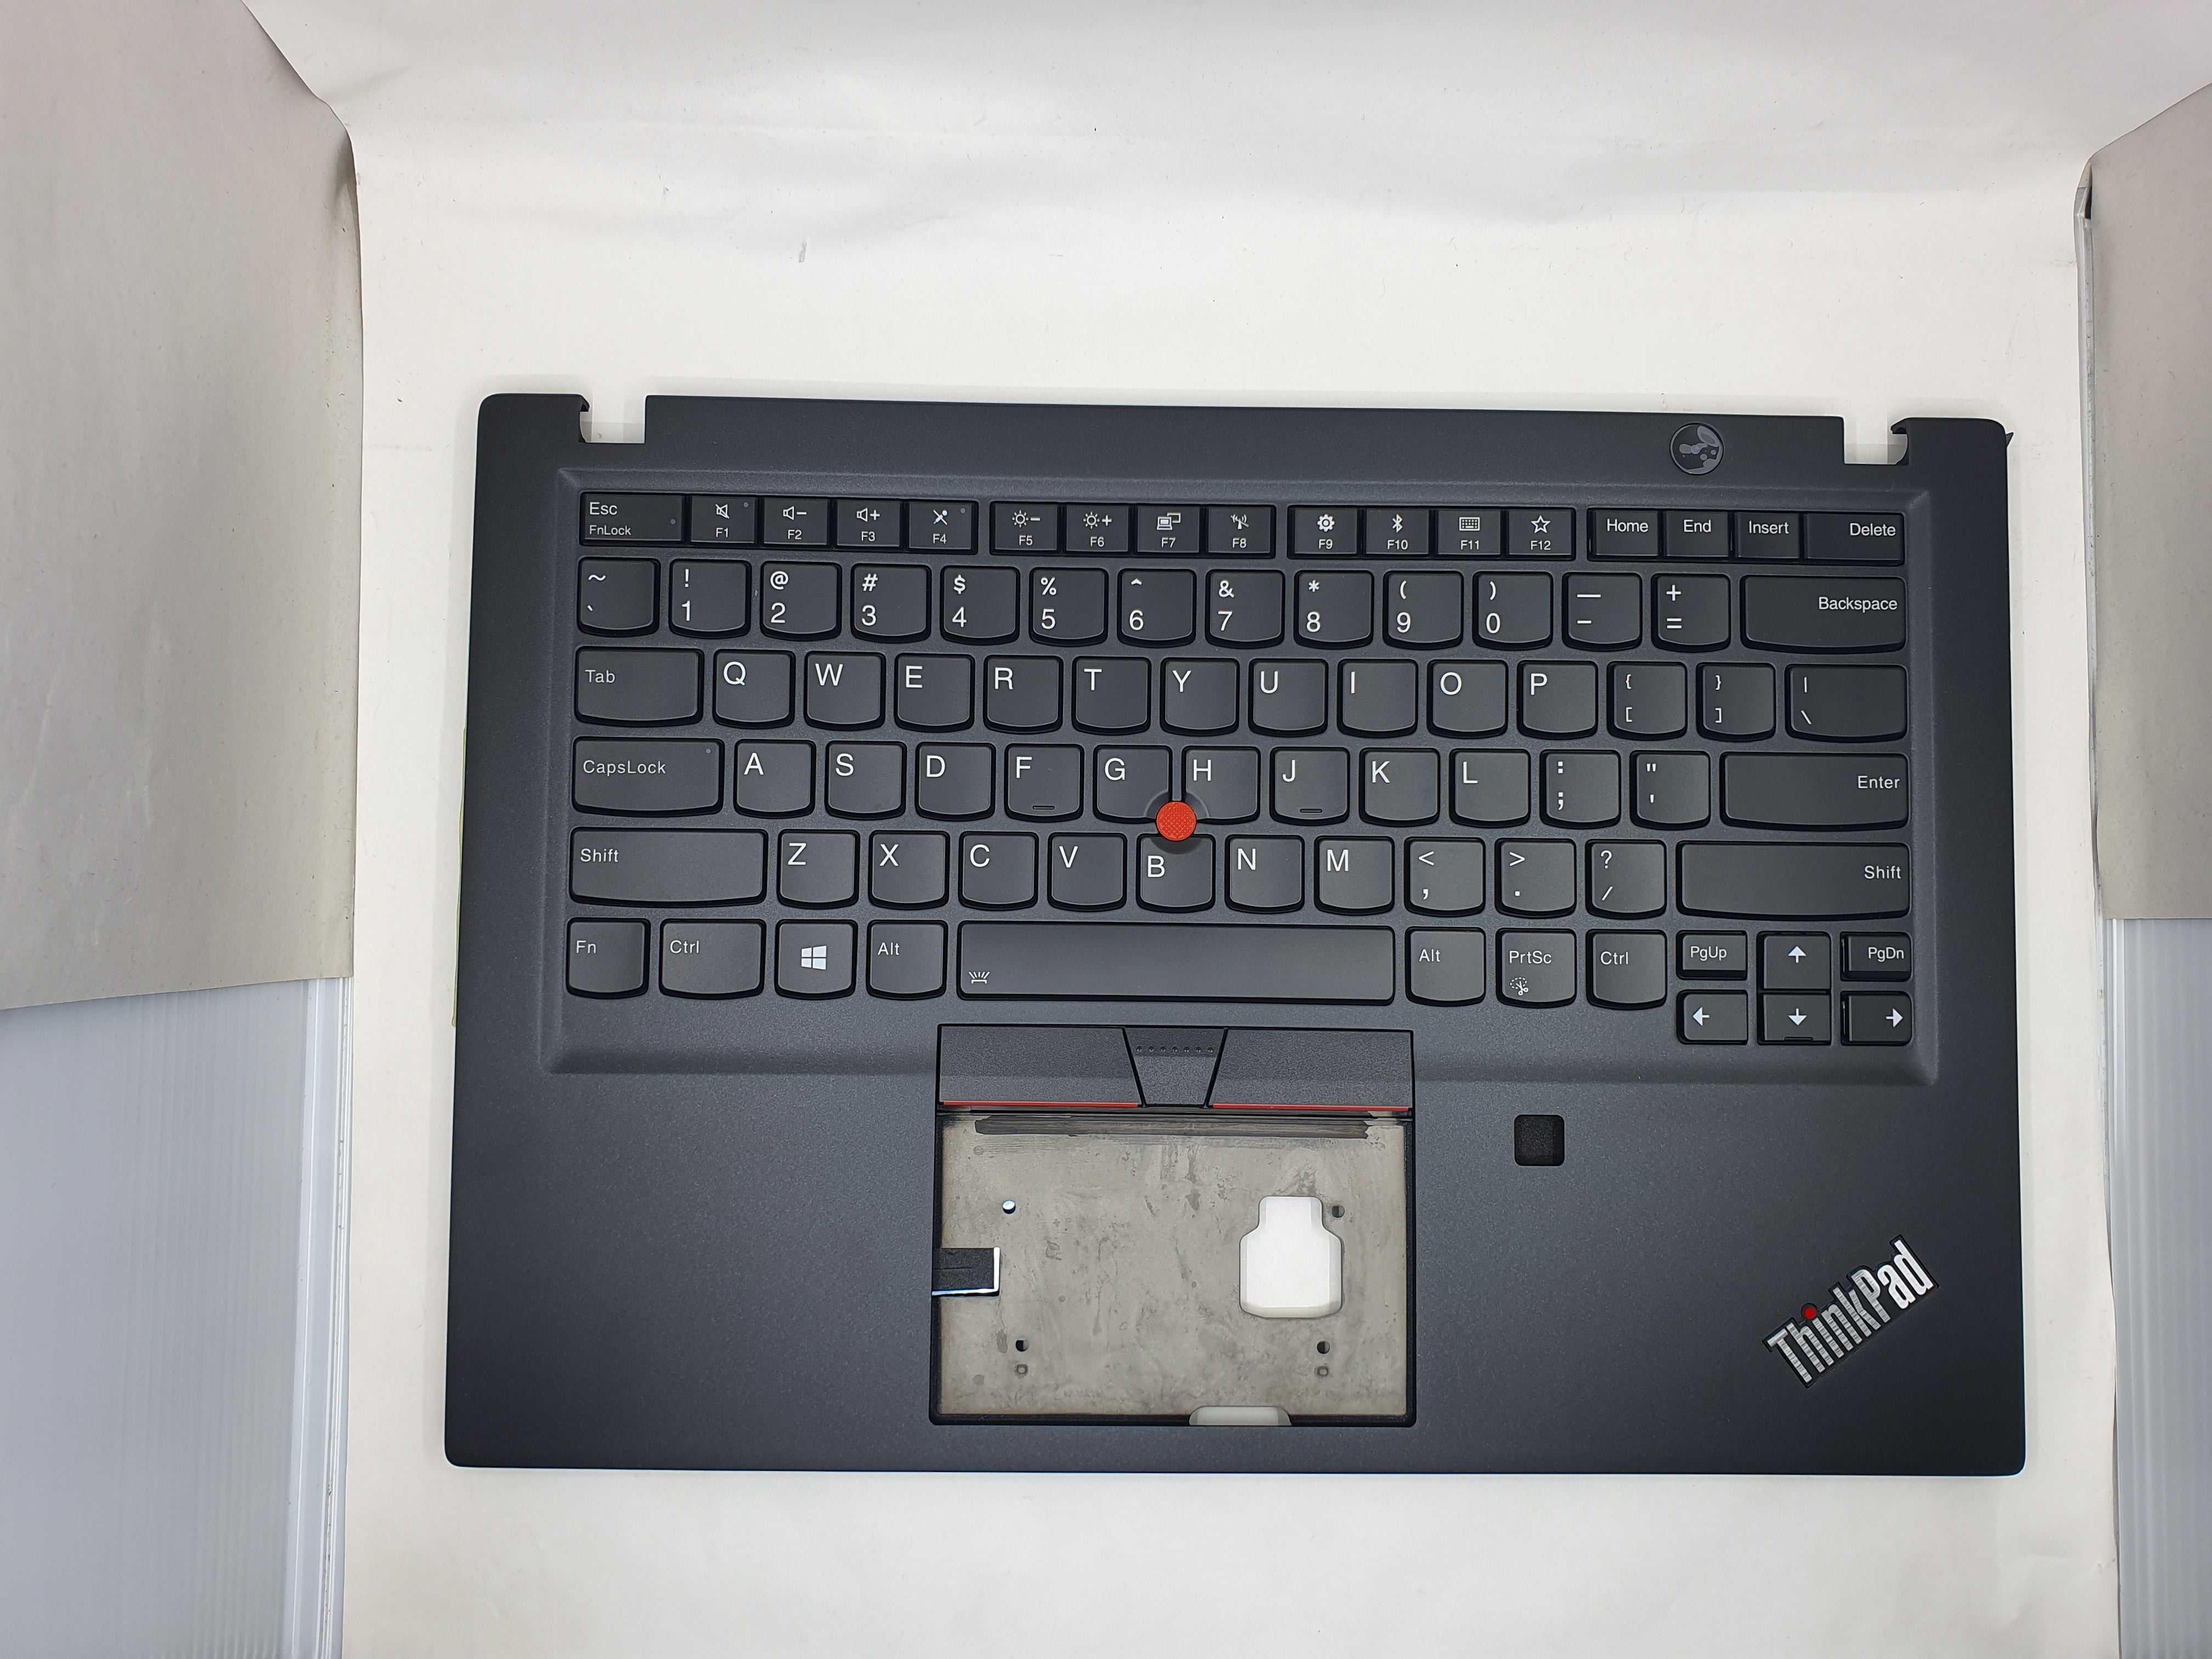 Lenovo Keyboard T495s WL for Replacement - ThinkPad T495s (Type 20QJ, 20QK)